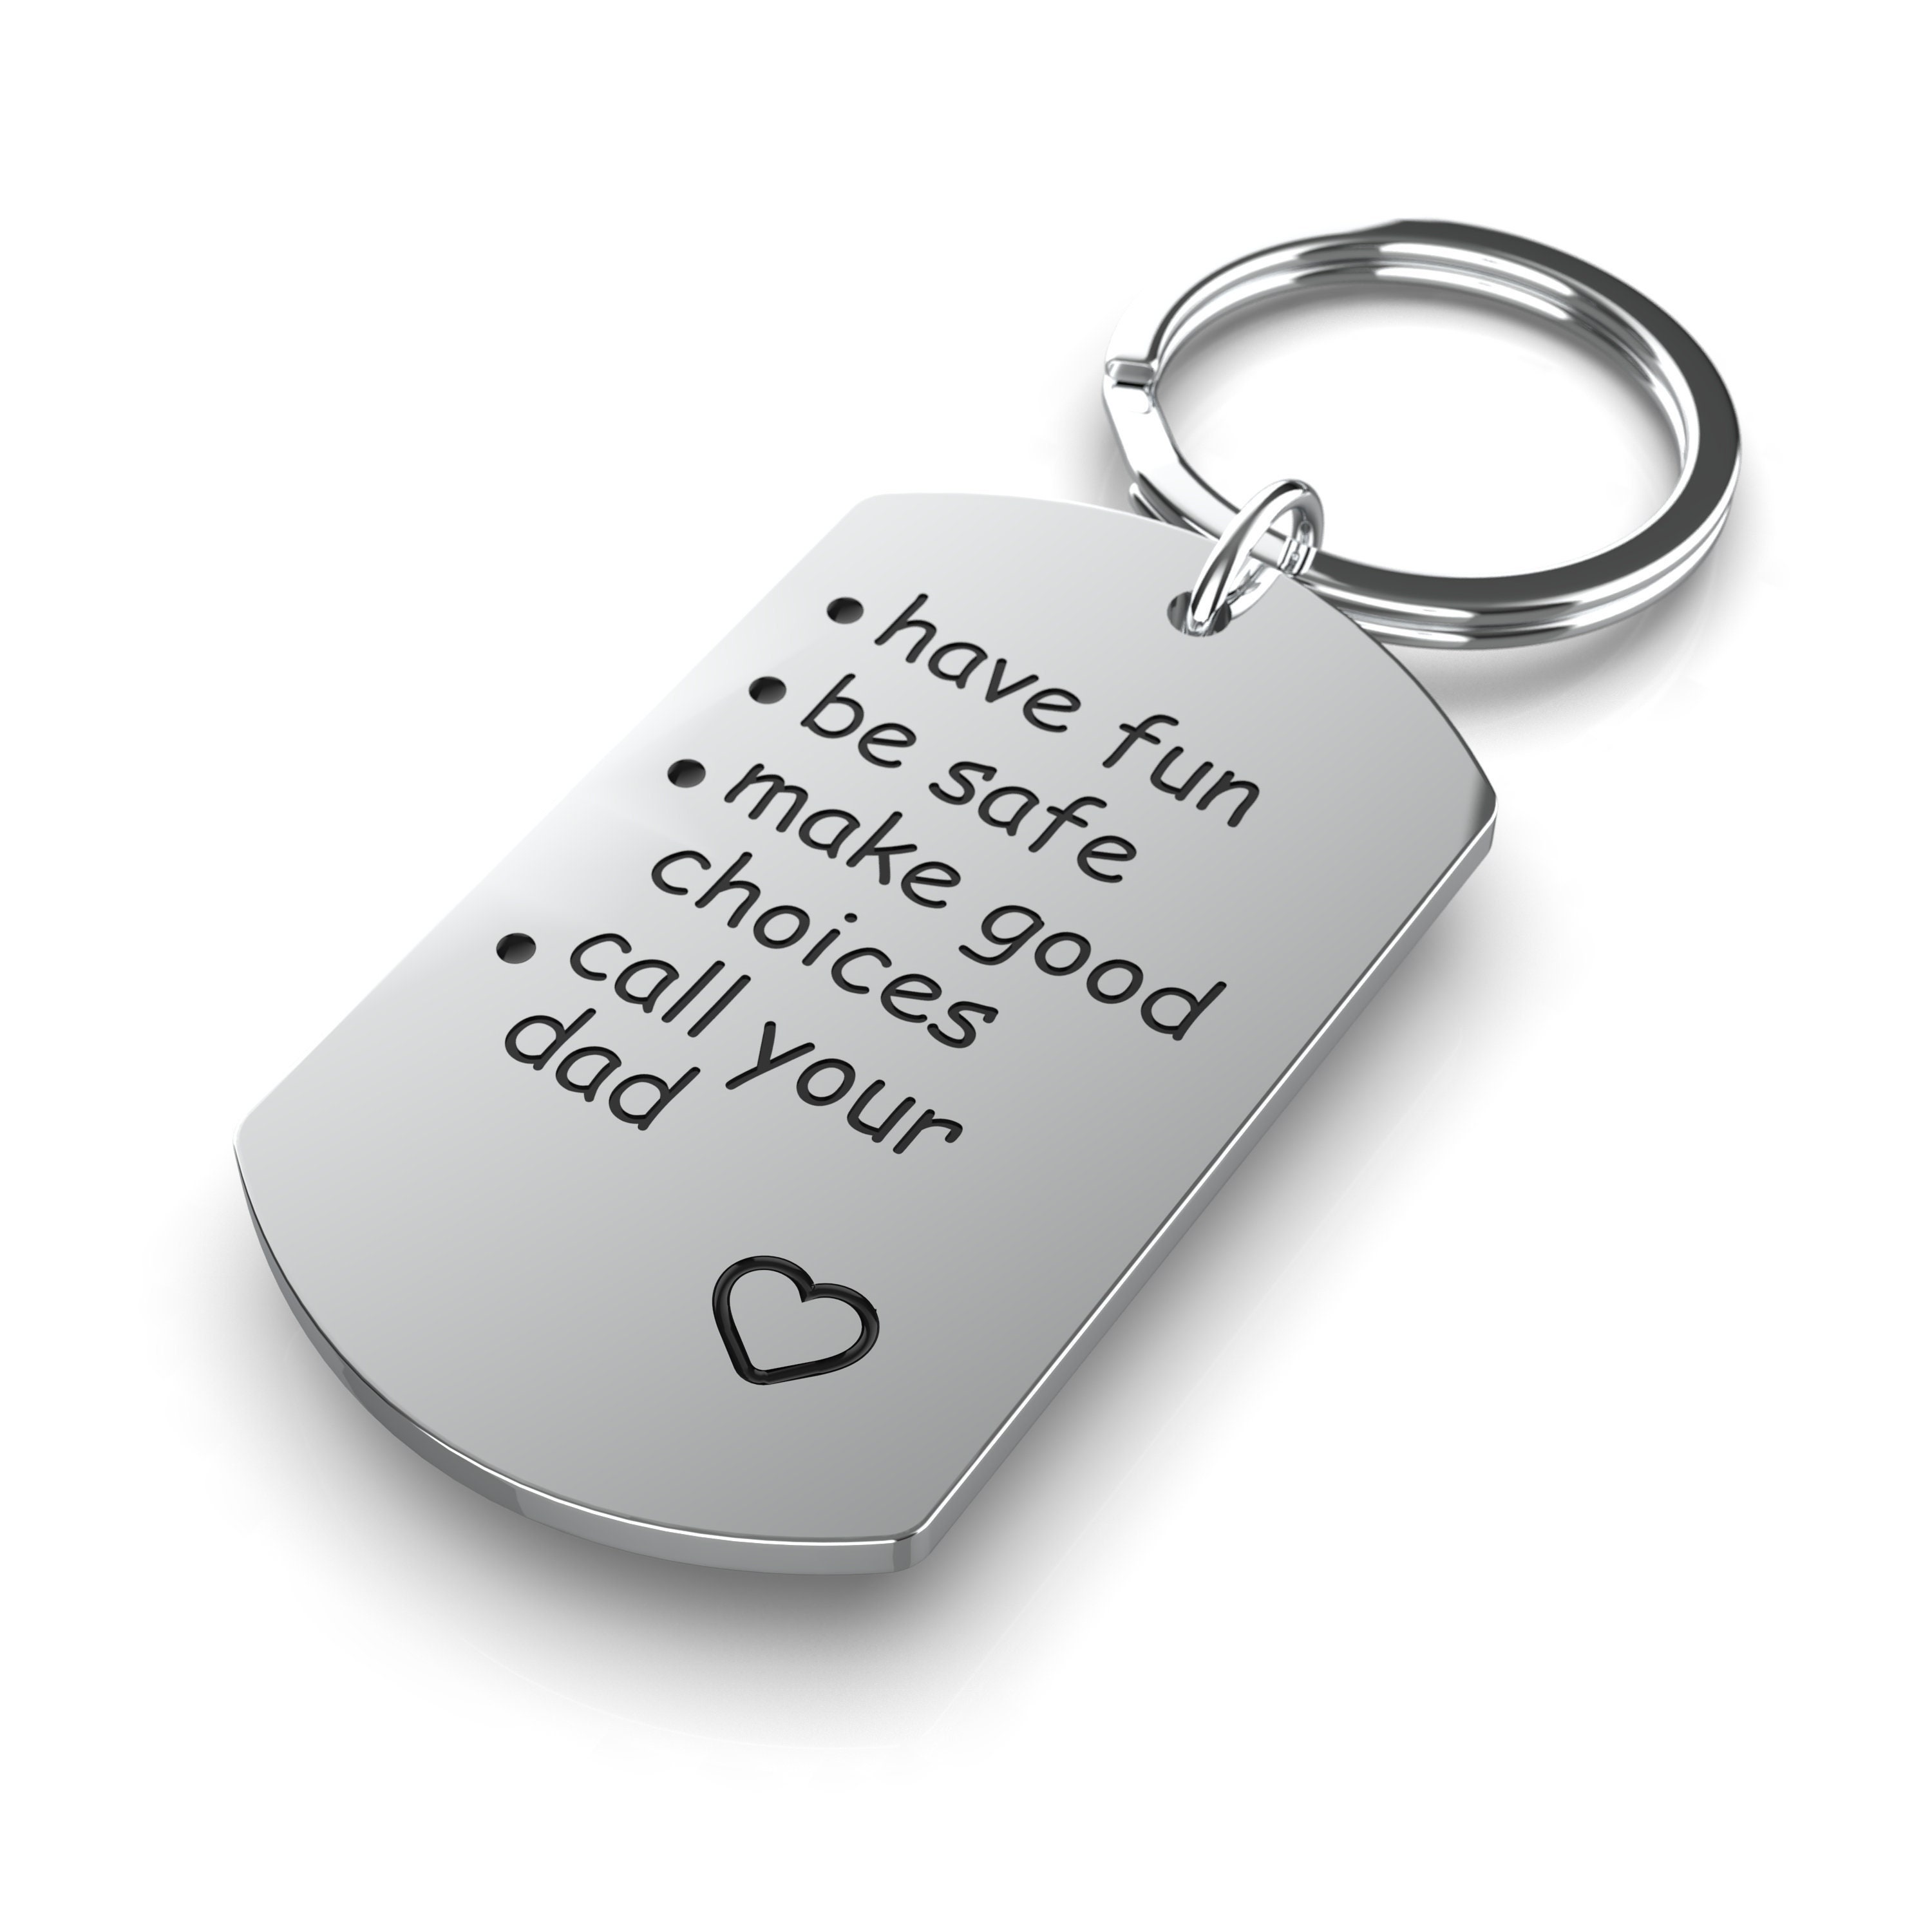 Call Your Family - Have Fun Be Safe Make Good Choices Keychain Creative  Gifts CN